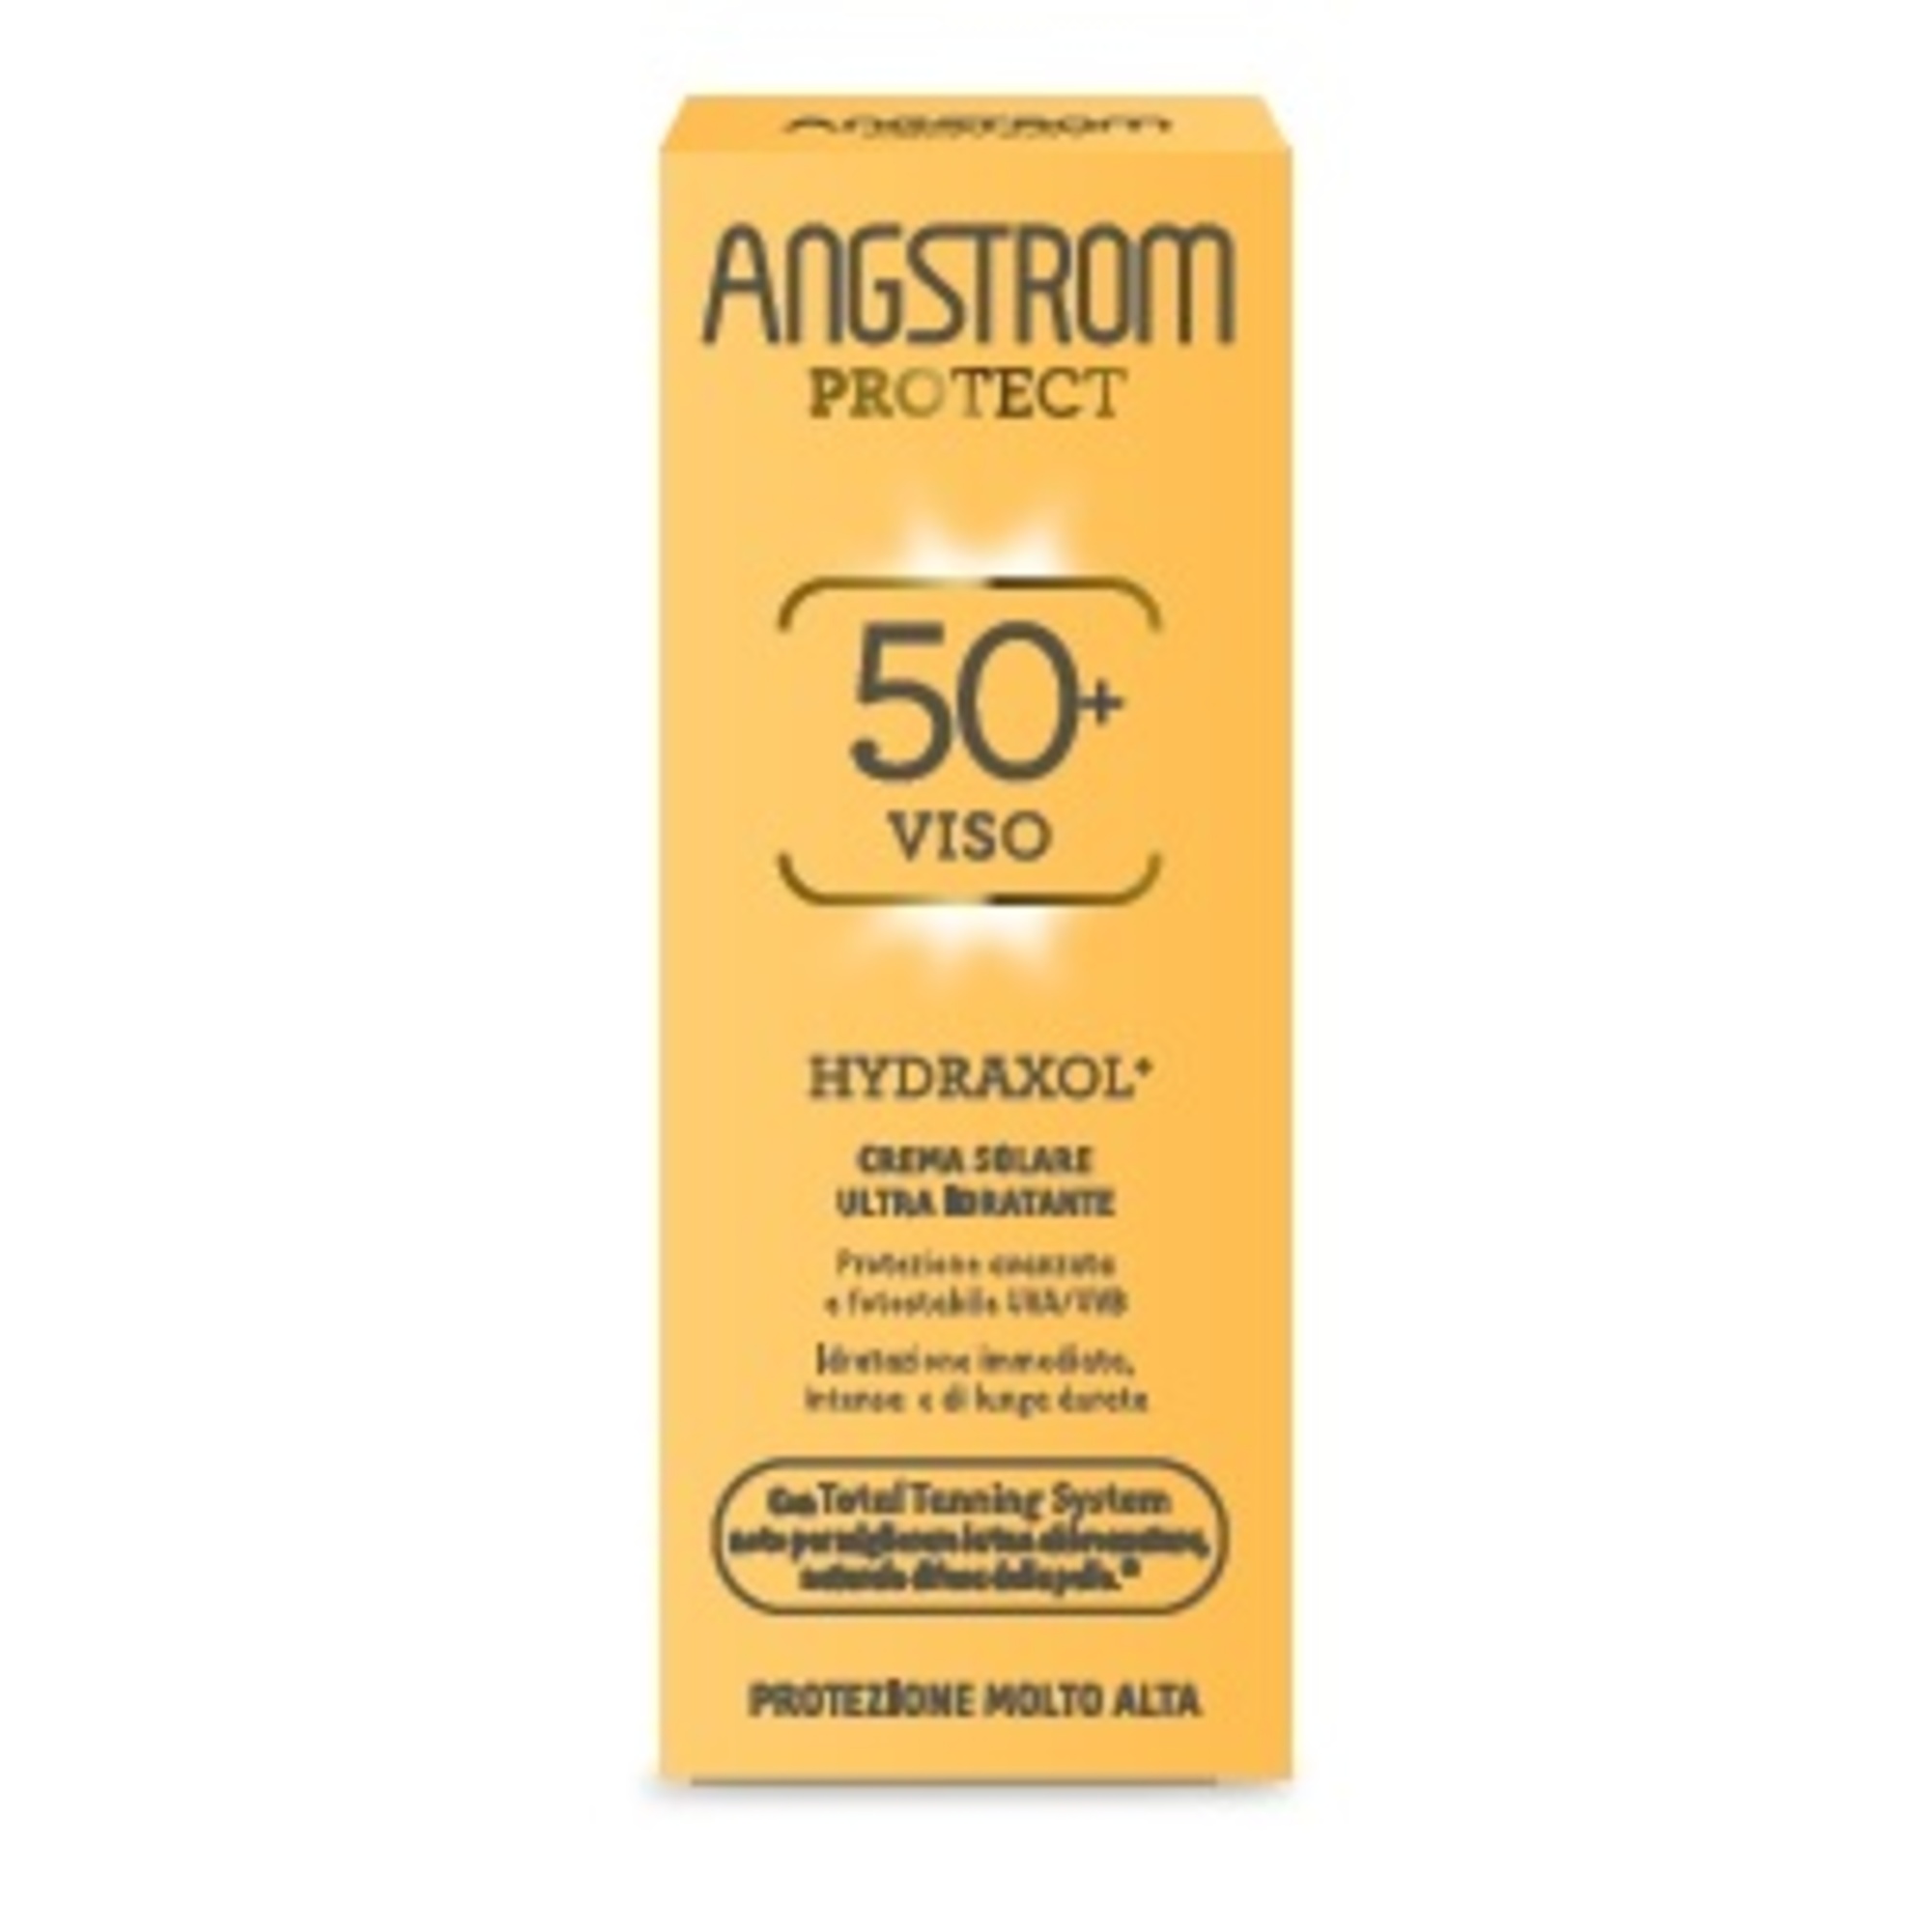 Angstrom protect hydraxol crema solare ultra prot. 50+ 2024 - Angstrom